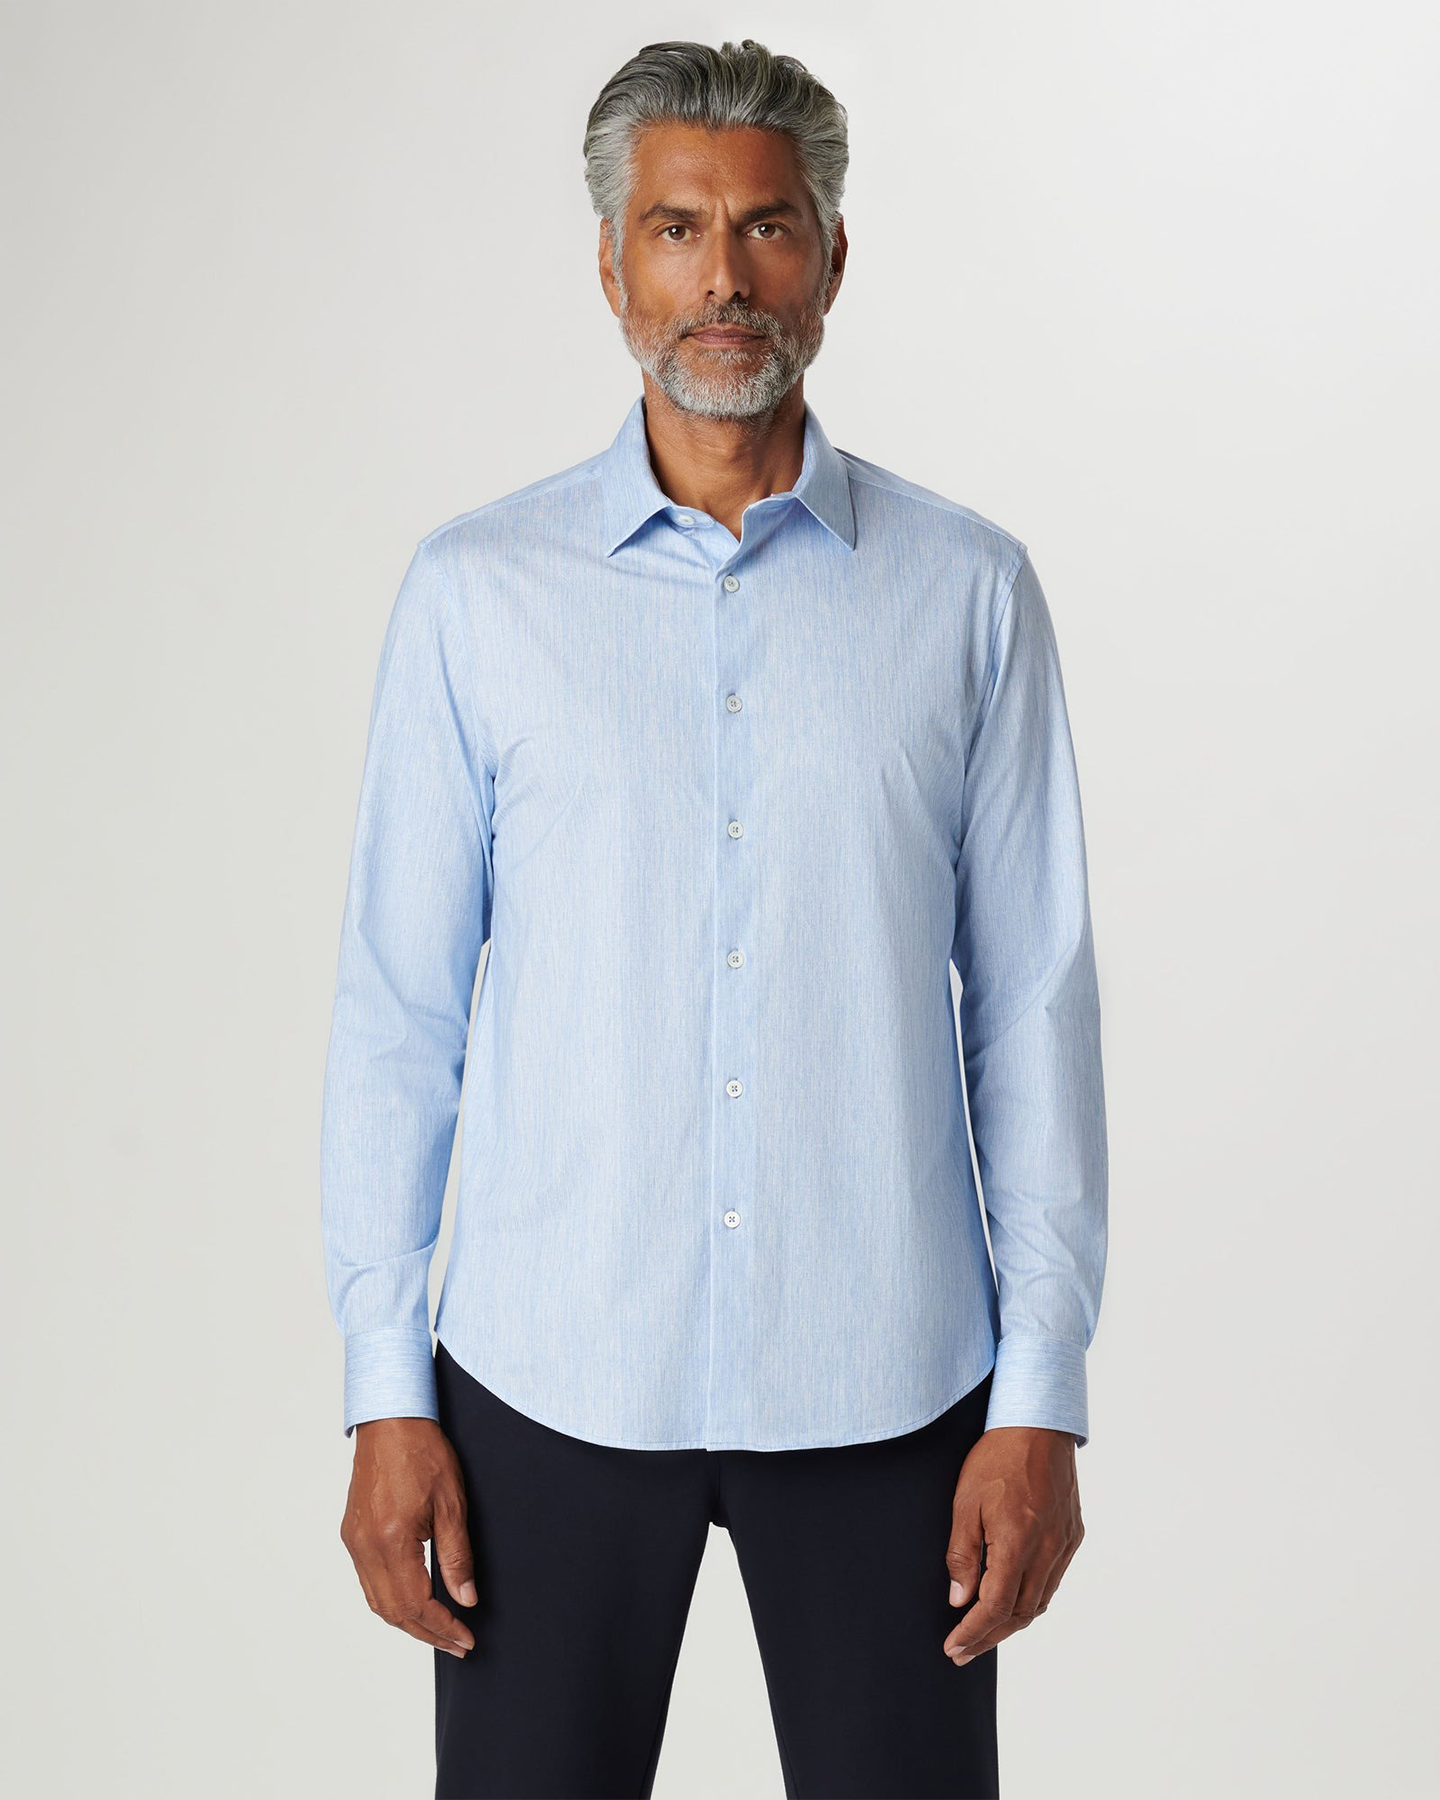 ABSTRACT STRIPE 8 WAY STRETCH SHIRT - CLASSIC BLUE